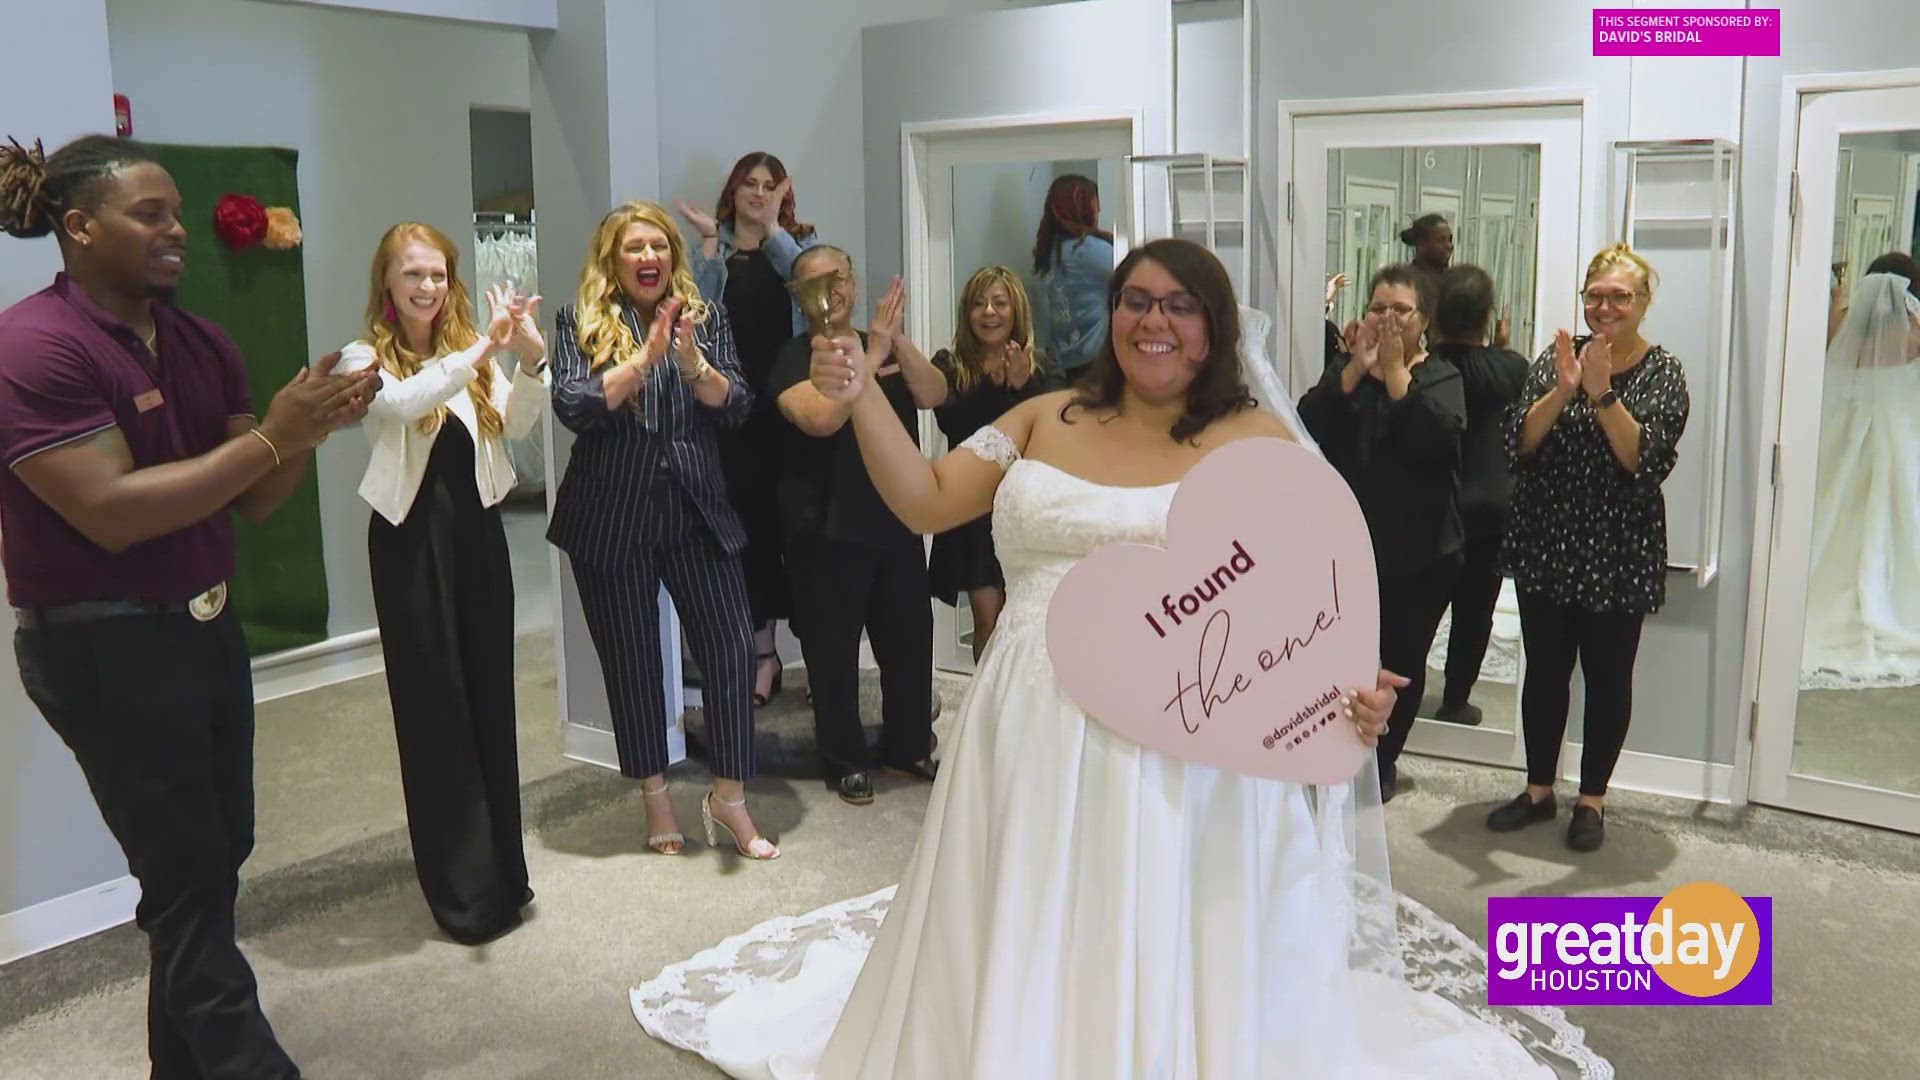 Wedding season is in full swing, and David's Bridal shares their latest bridal dress trends.